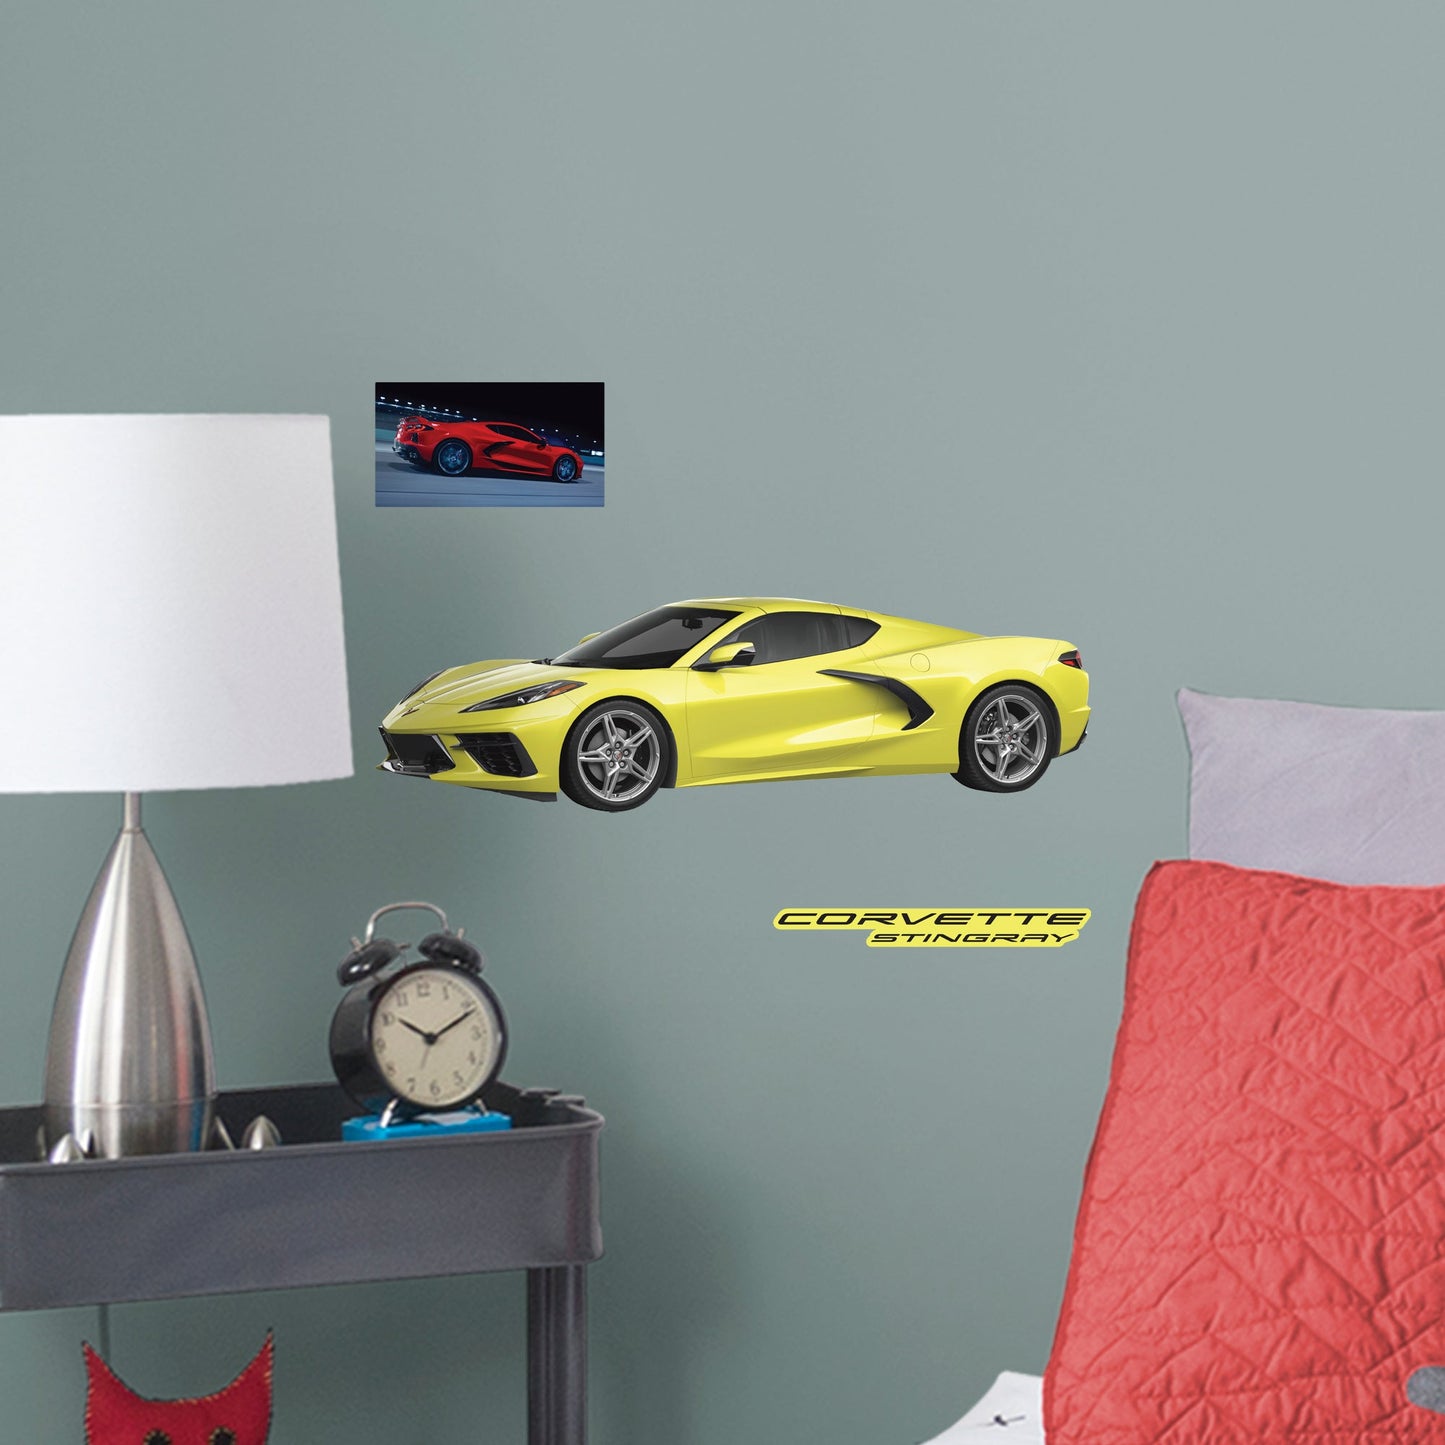 Chevrolet Corvette Yellow Stingray: Officially Licensed GM Removable Wall Decal